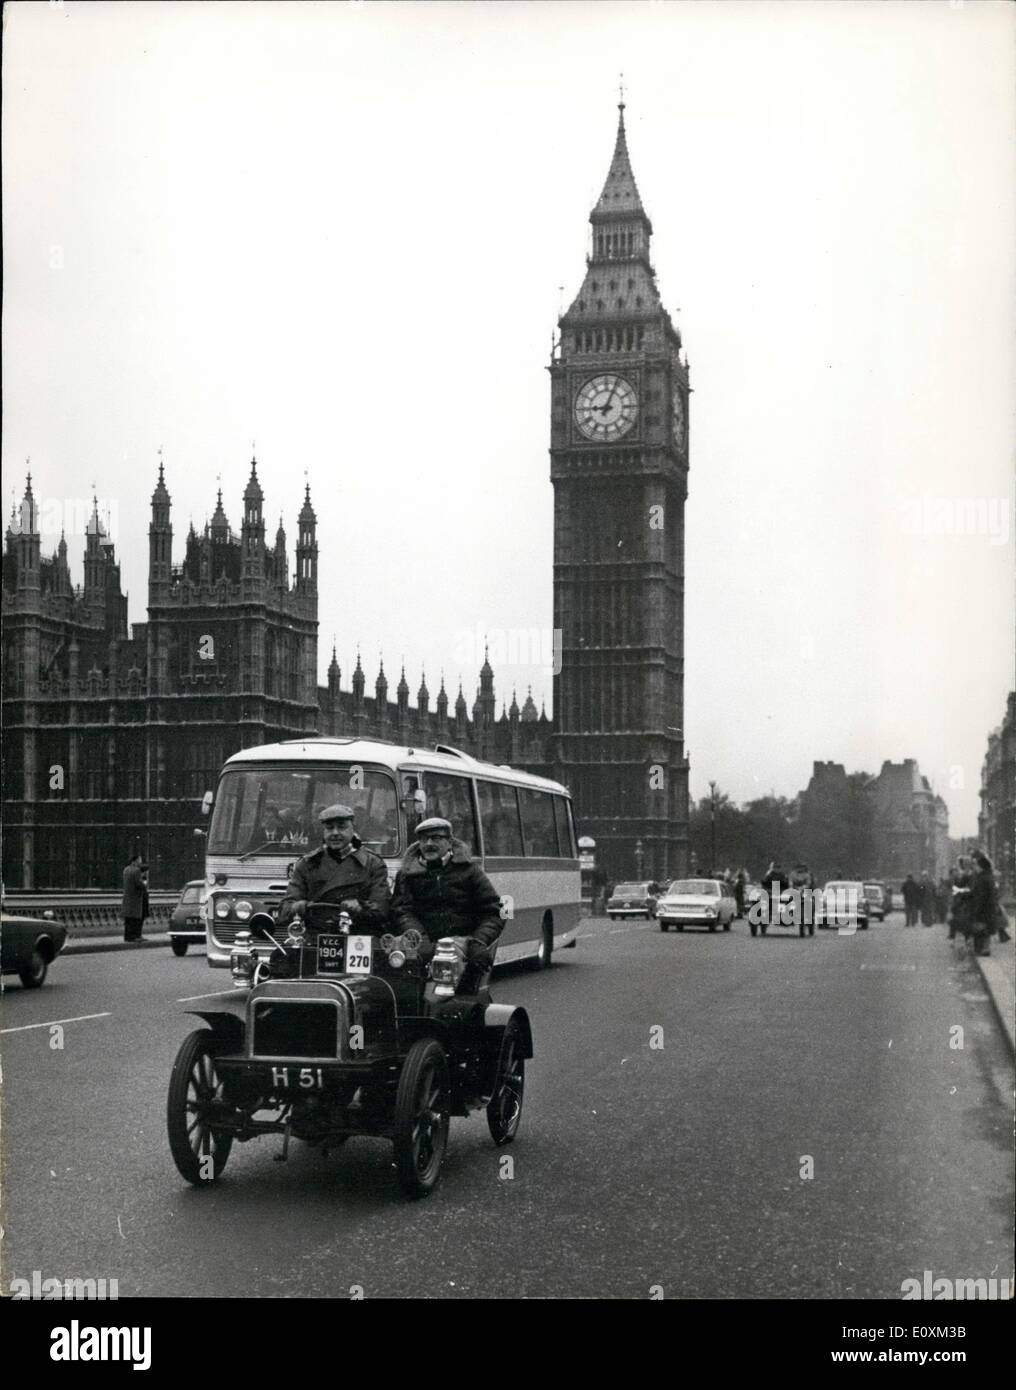 May 05, 1967 - Veteran Cars take Part in Commemoration run from Hyde Park to Brighton.: A record 283 Veteran cars built before 1905 were entered for the Royal Automobile Club's London to Brighton run which started from Hyde Park early this morning, Photo shows One of the veteran cars, a 1904 Swift, entered by G. Solomon is pictured alongside a modern coach as it passes over Westminster Bridge on its way to Brighton this morning. Stock Photo